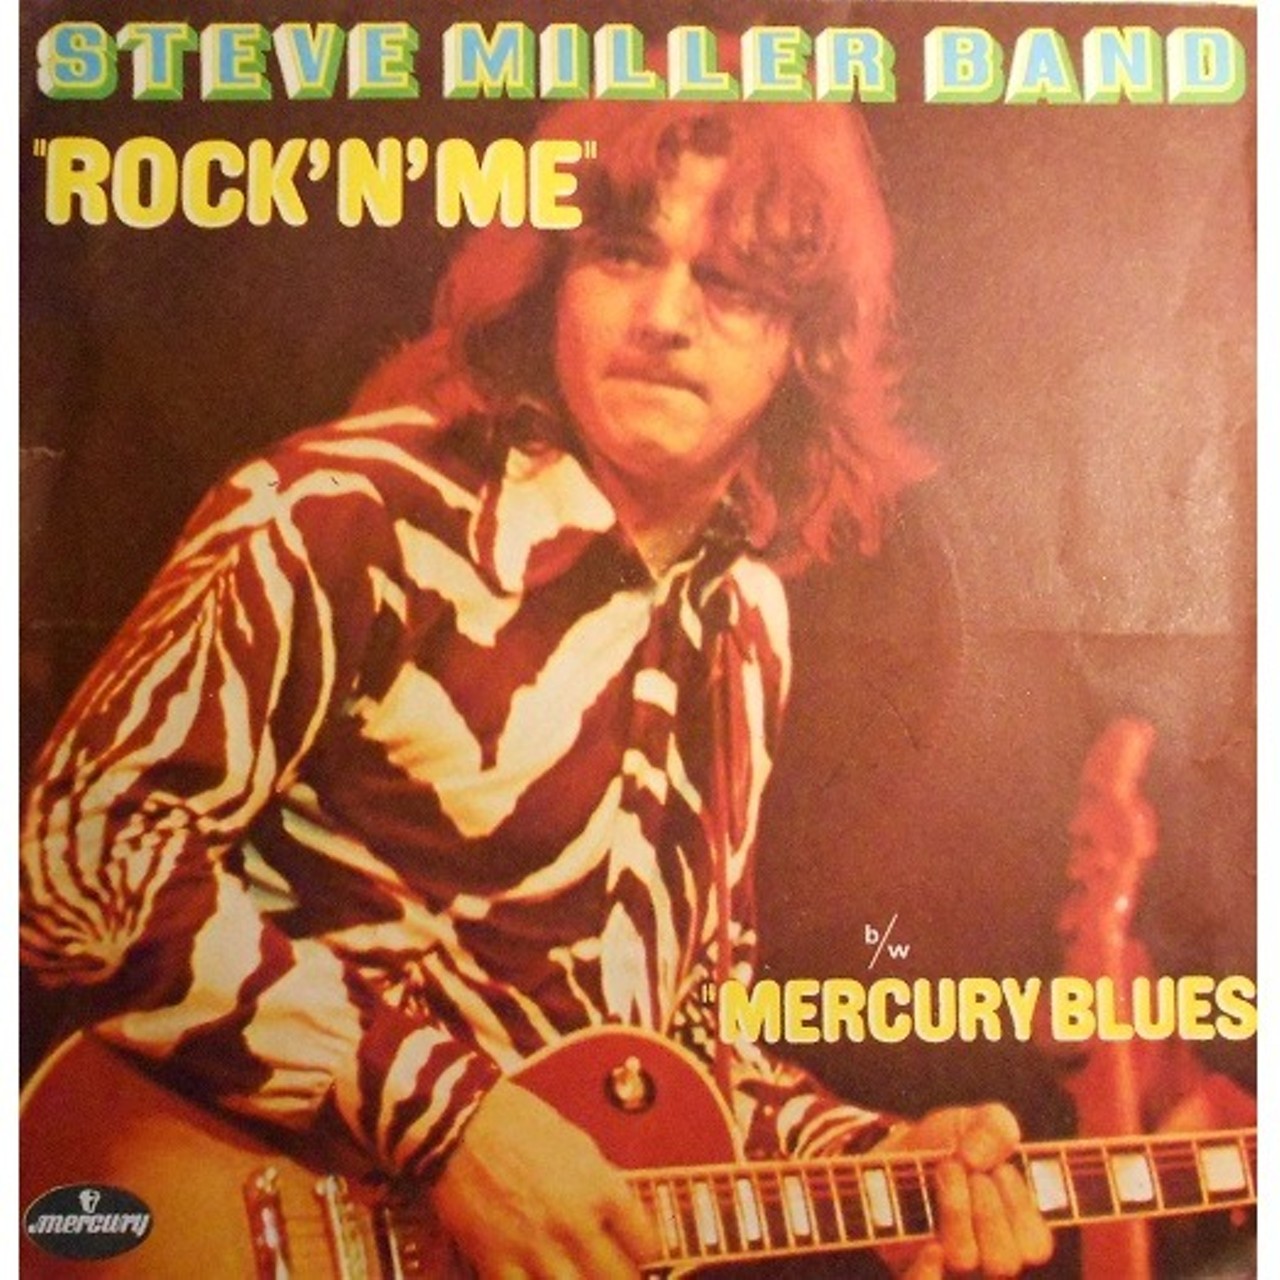 "Rock'n Me" was written by Steve Miller for the Steve Miller Band. The song went #1 on the U.S. Billboard Hot 100, #1 in Canada and #11 in the UK. it was released in 1976.